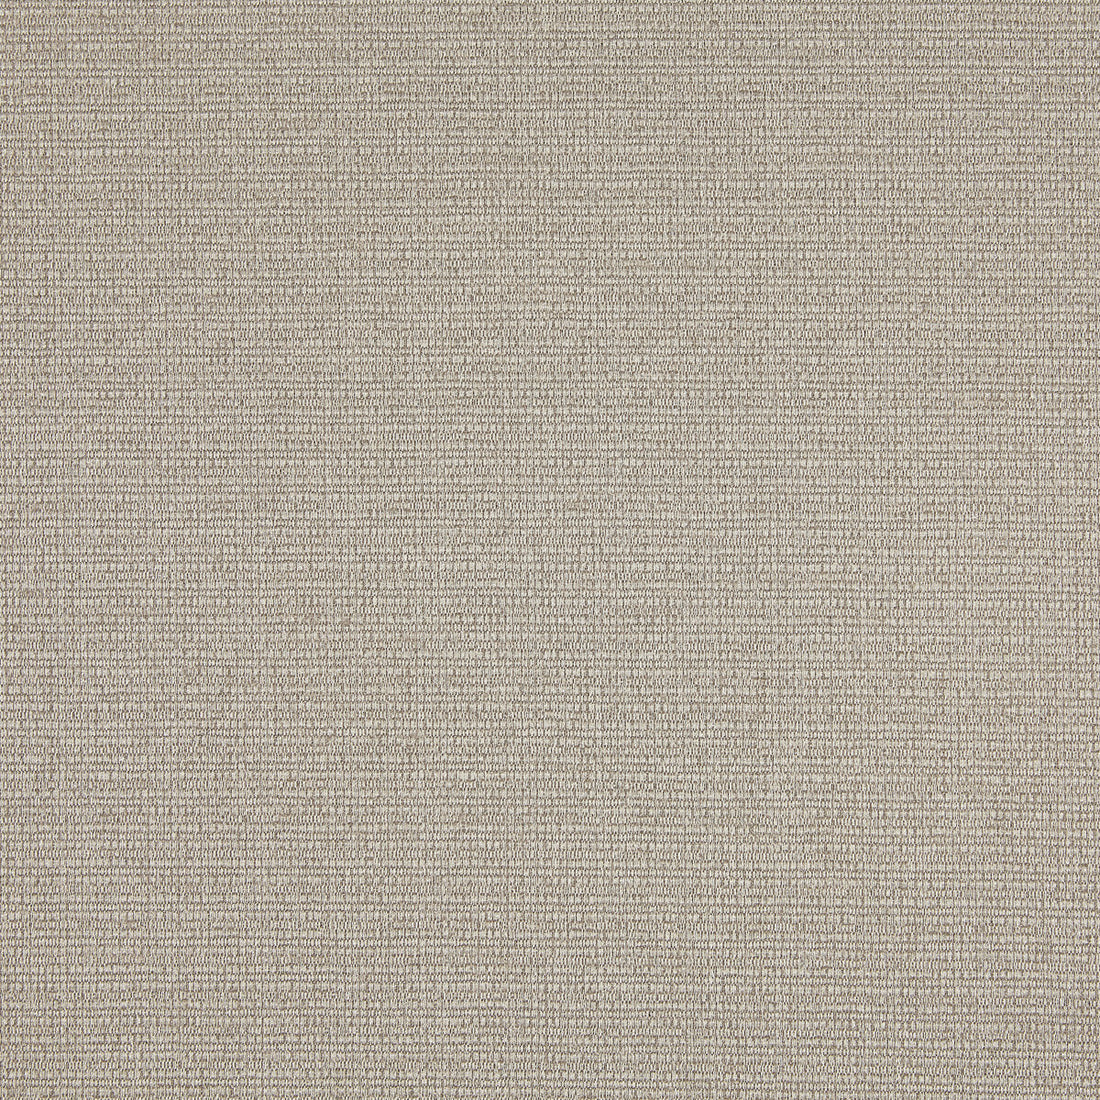 Shelley fabric in 6 color - pattern LZ-30365.06.0 - by Kravet Design in the Lizzo collection